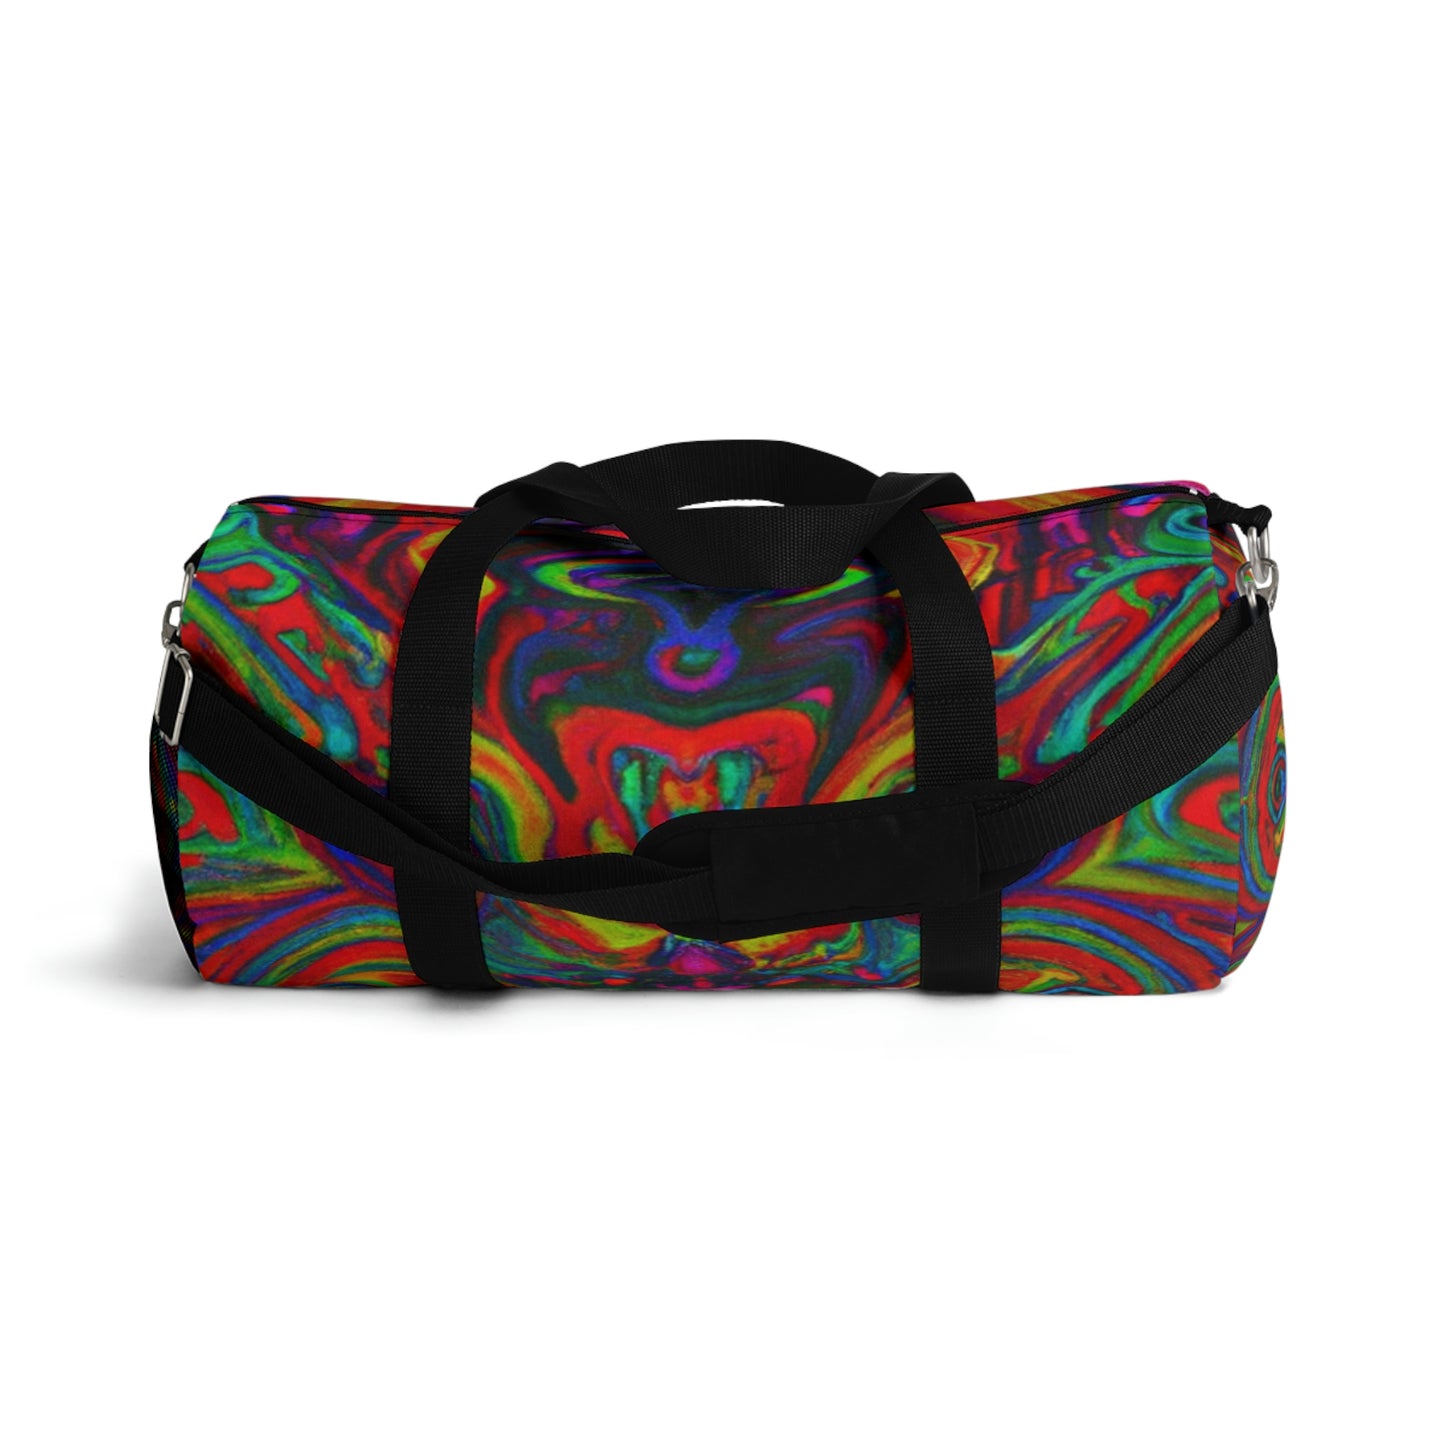 Aurora Couture - Psychedelic Duffel Bag